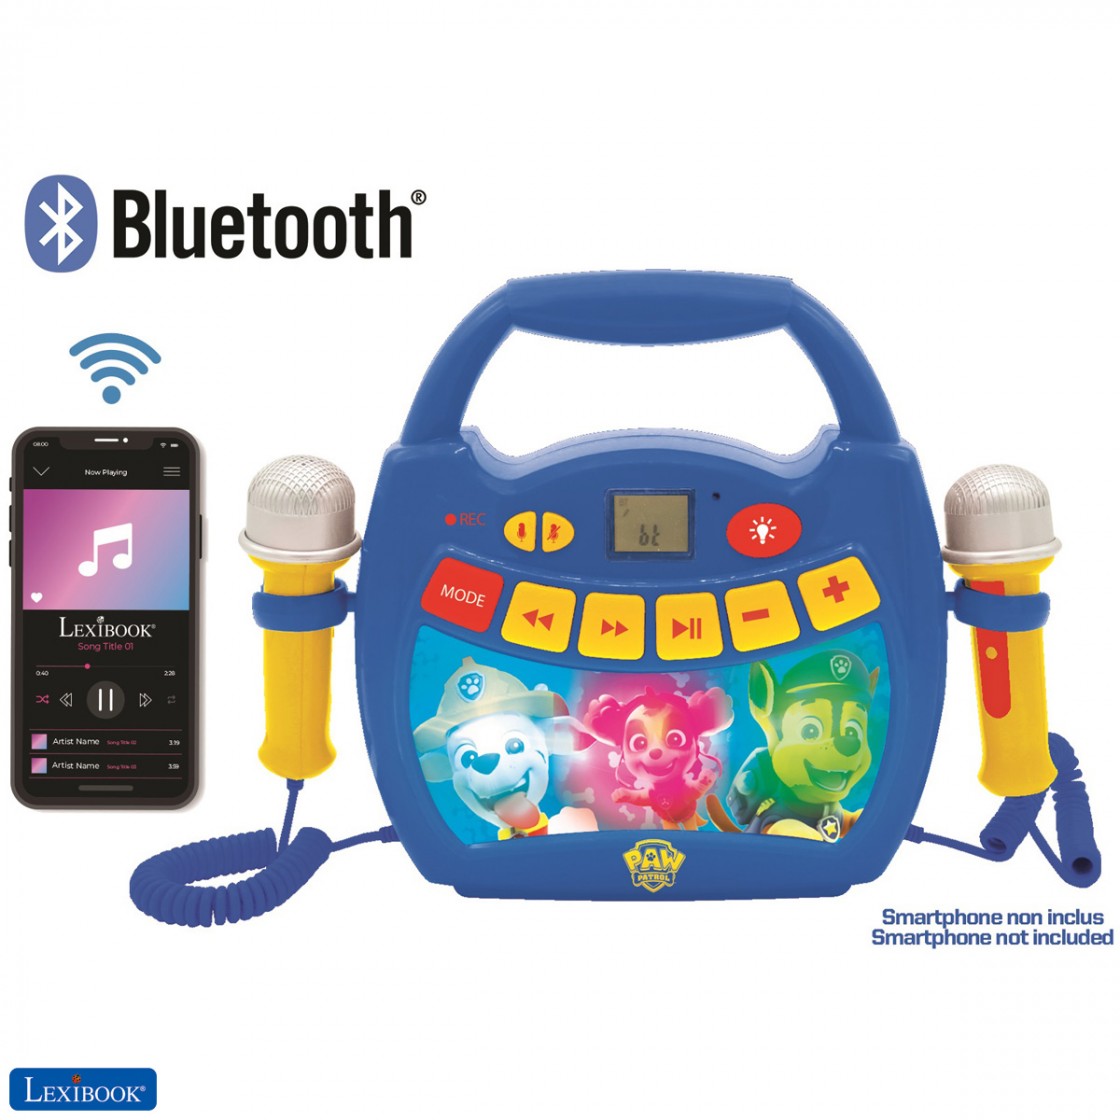 Lexibook Harry Potter Reproductor CD Bluetooth con Luces